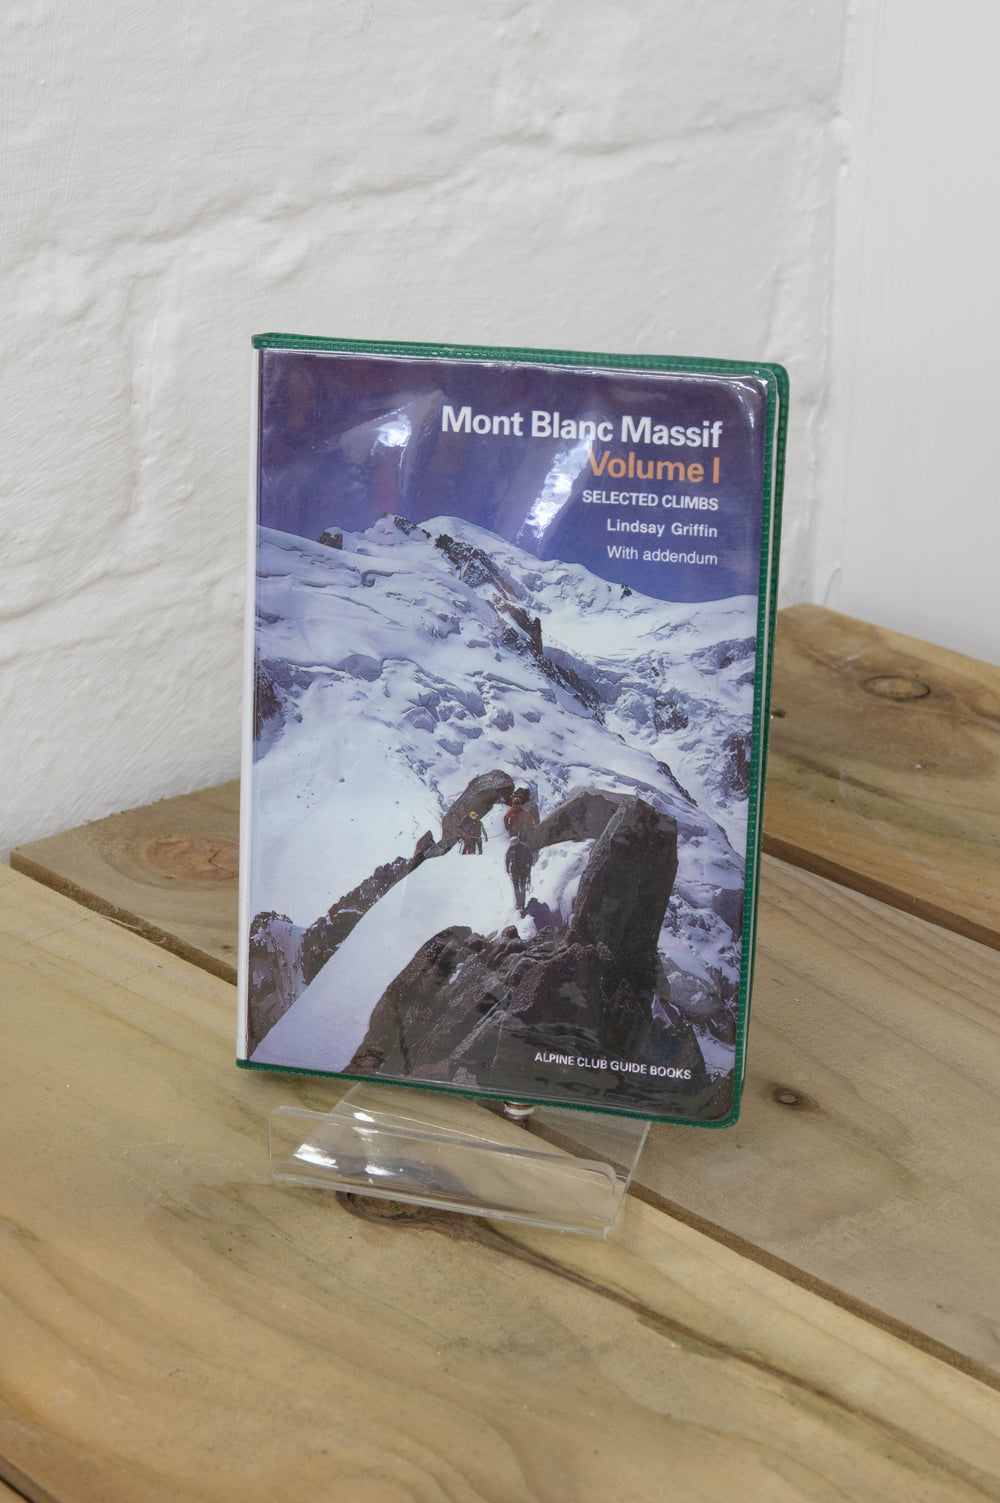 Mont Blanc Massif : Selected Climbs Volume 1